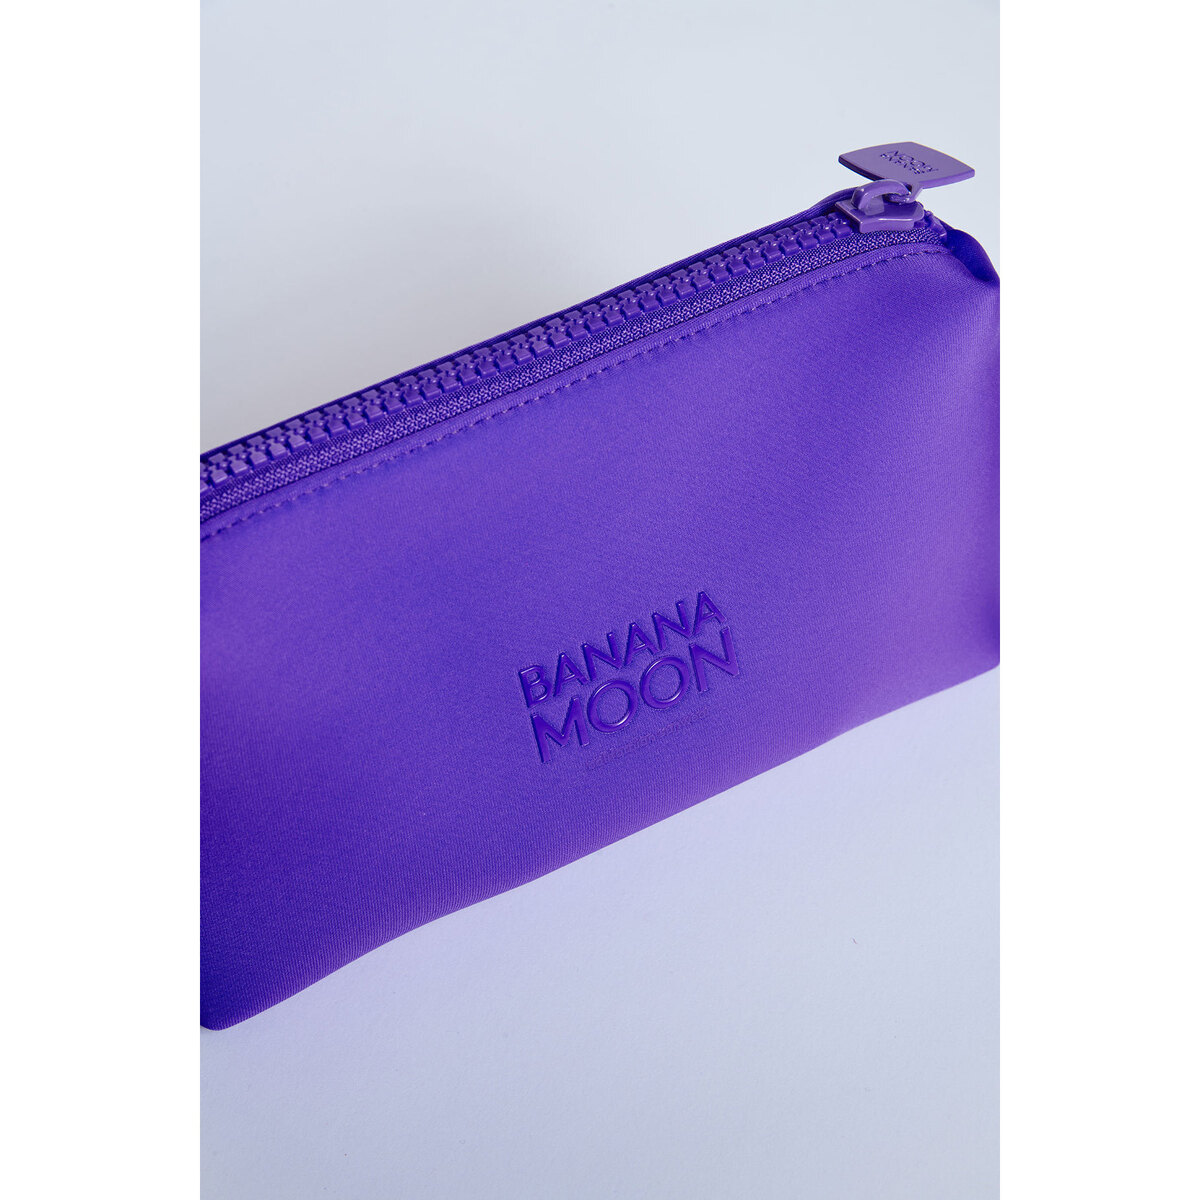 Banana Moon Violet NEON POUCH Pl6dkhJY